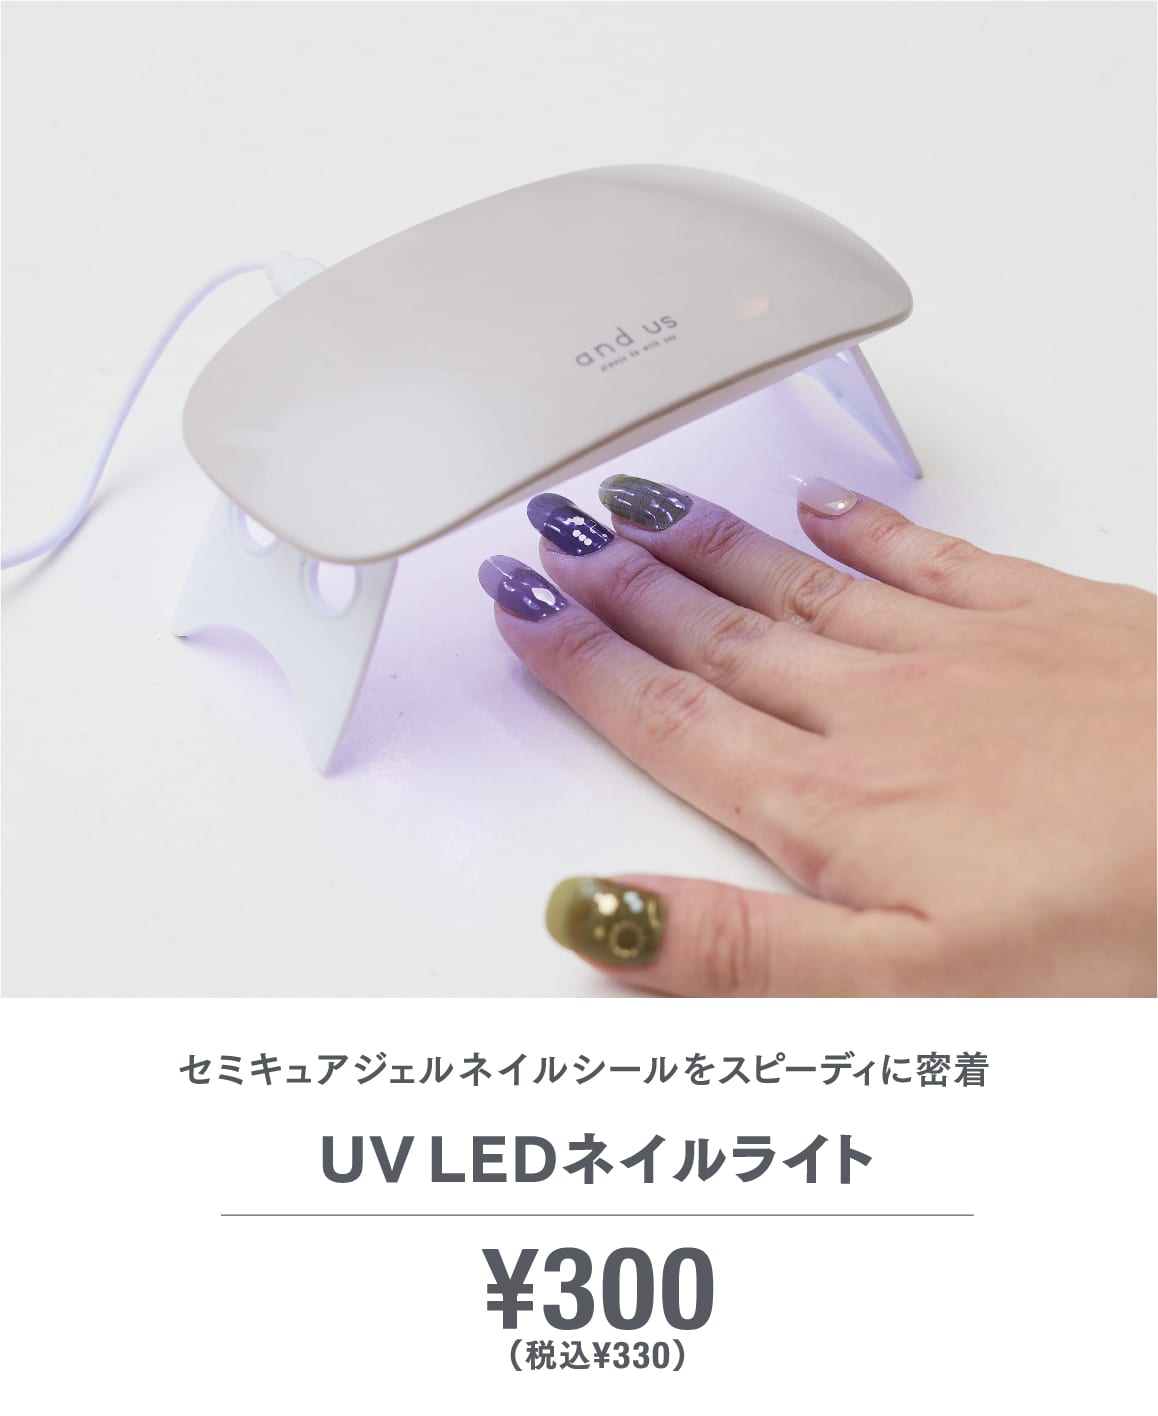 58%OFF!】 UVLEDネイルライト 1点 スリーコイン3coins uv ライト